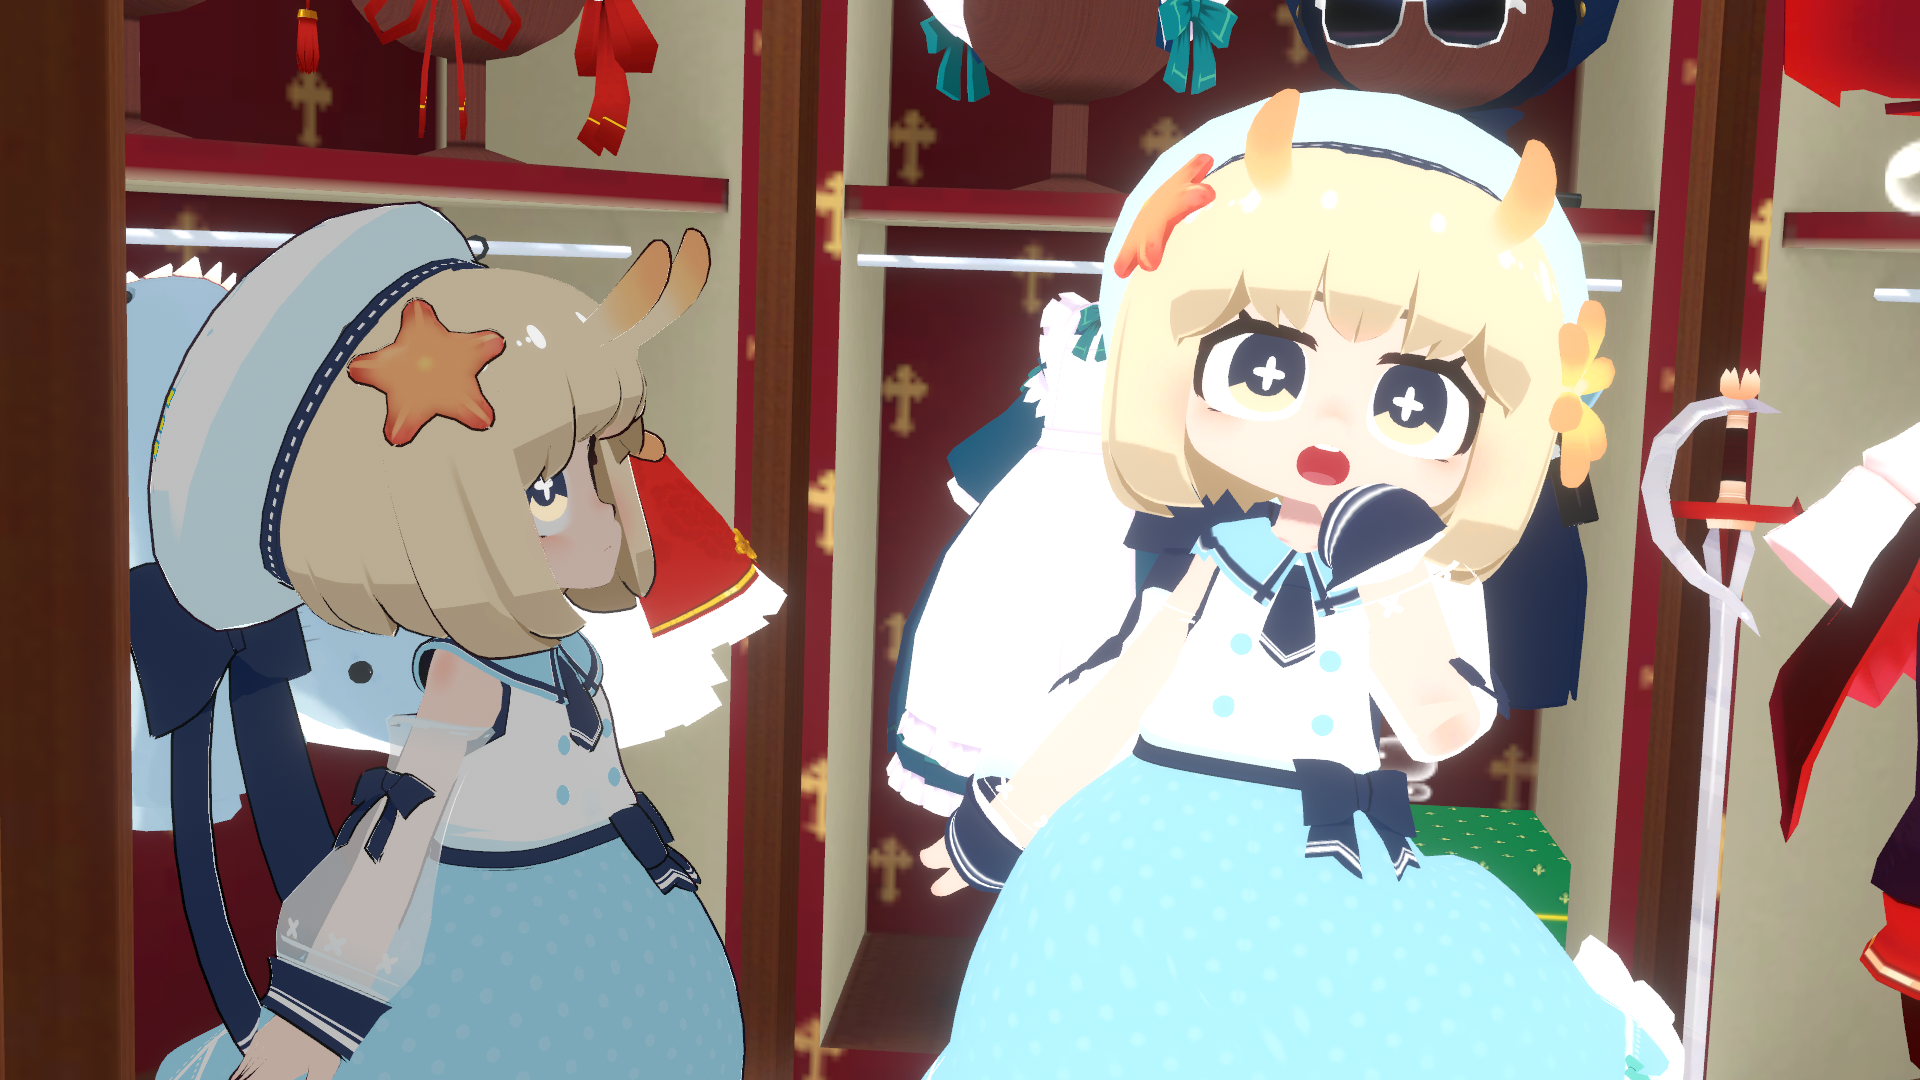 VRChat_1920x1080_2021-12-05_03-55-49.985.png